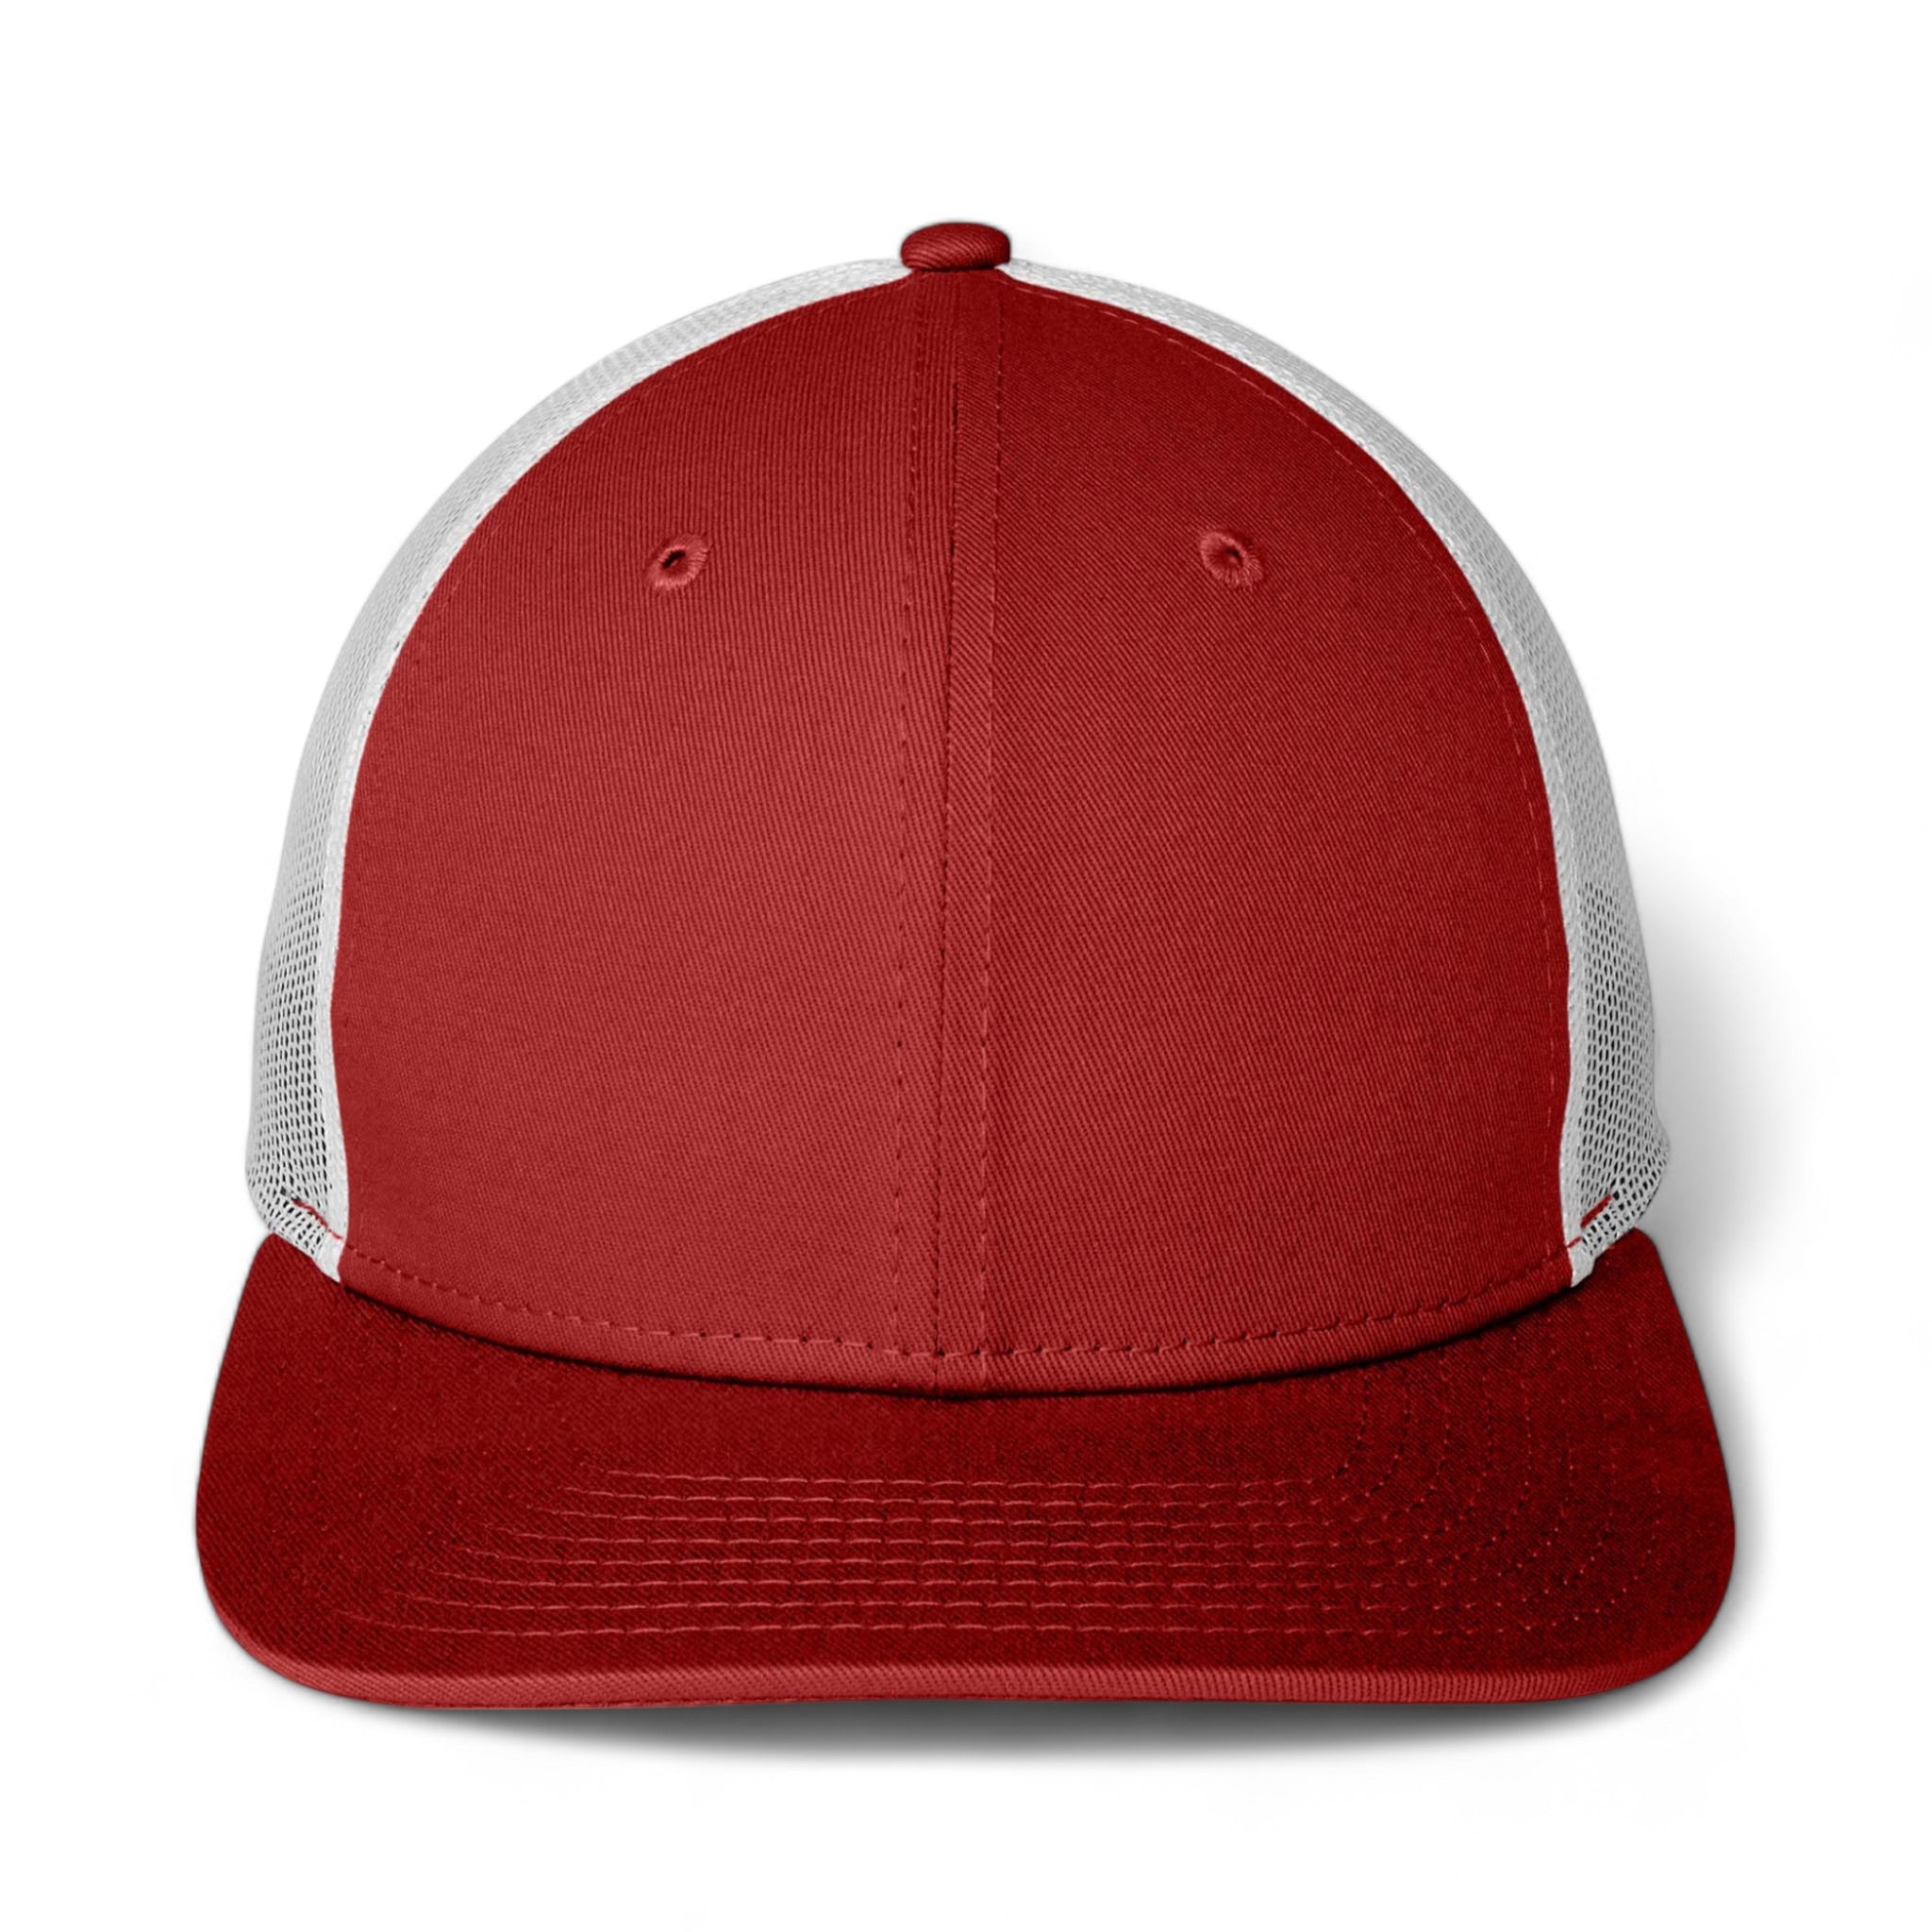 Front view of New Era NE207 custom hat in scarlet and white